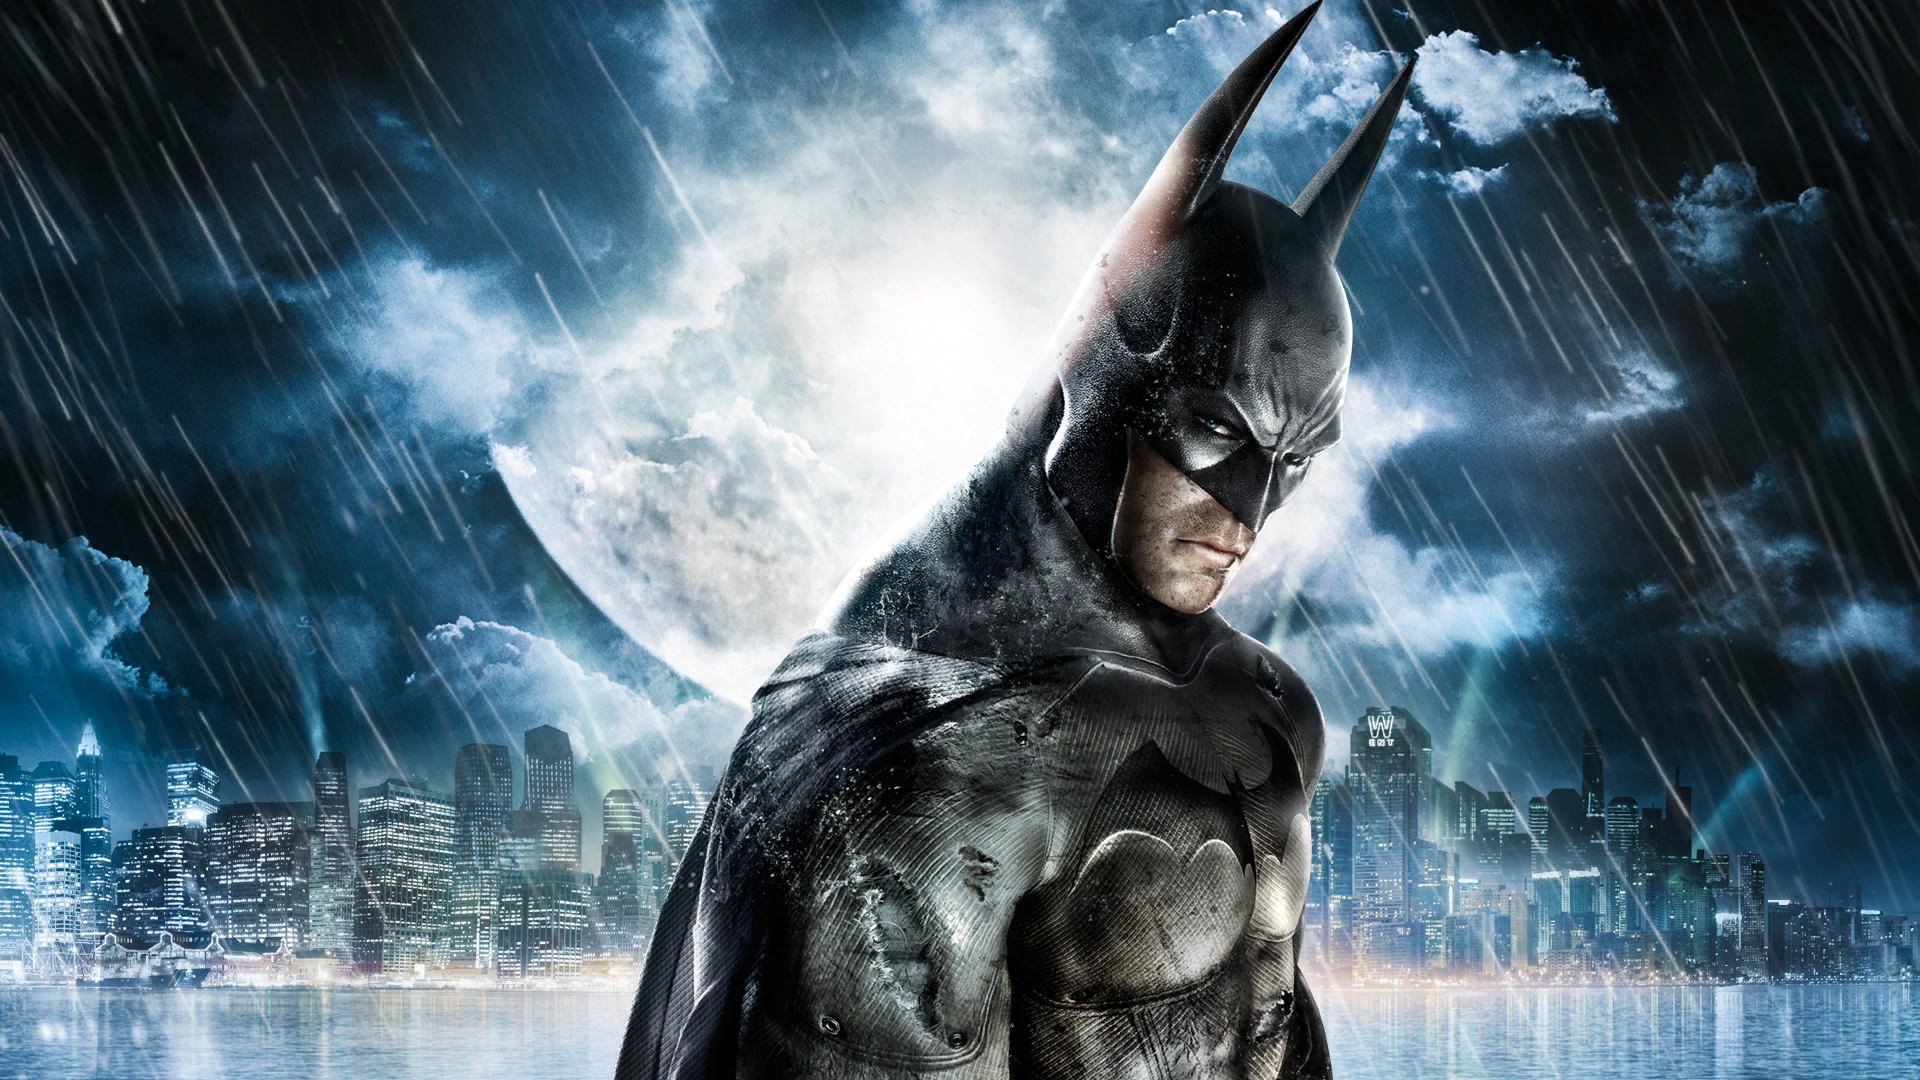 Batman Arkham Collection Featuring Three Games Supposedly on Its Way